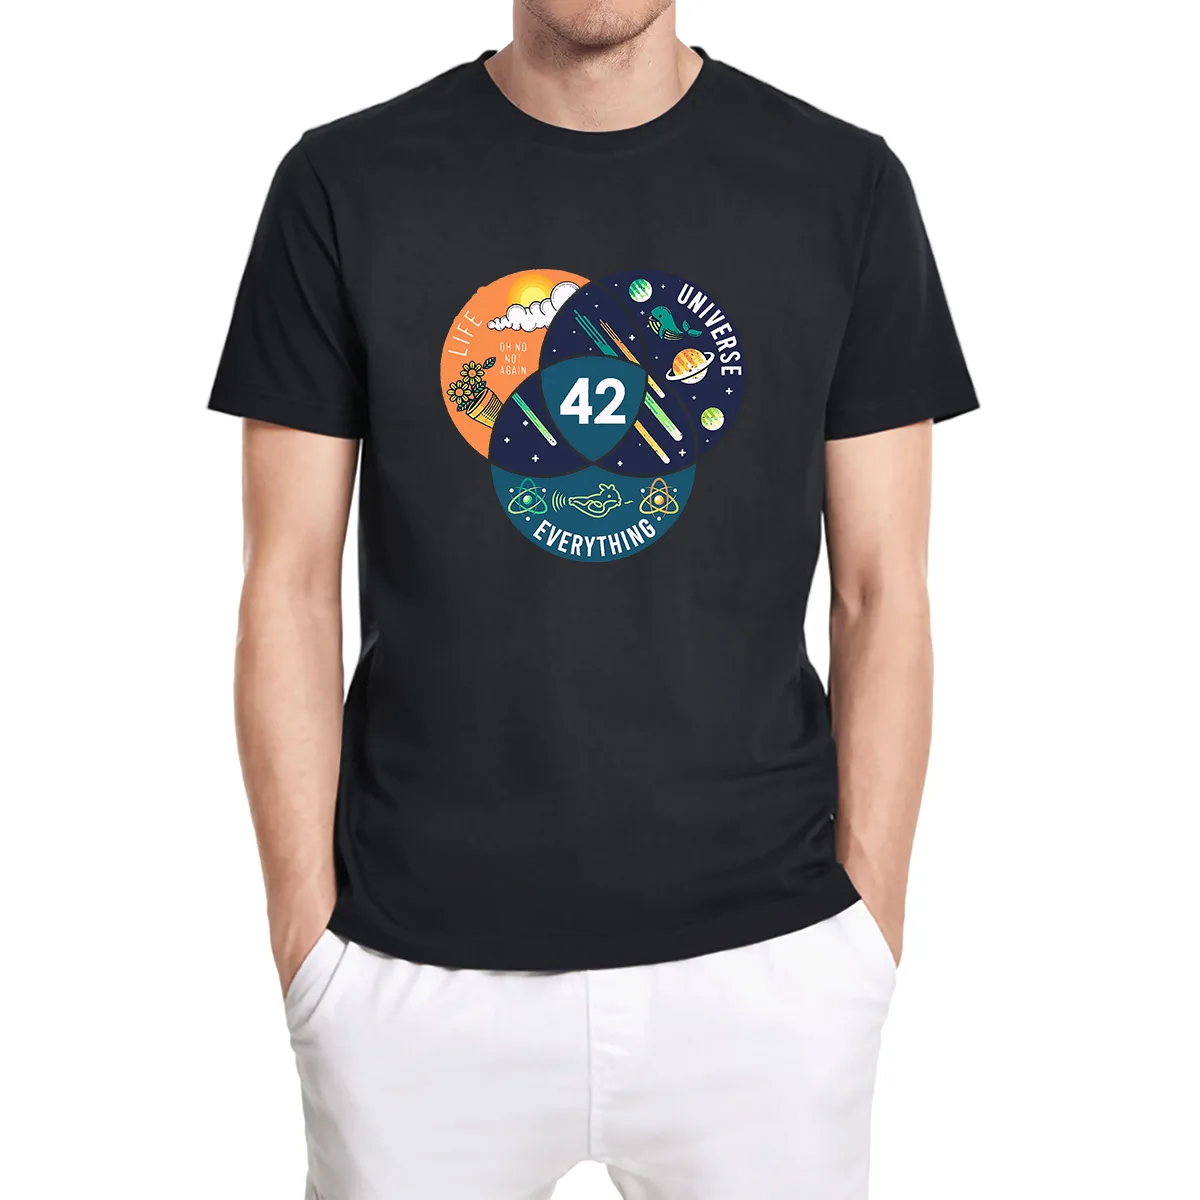 

42 The Answer To Life The Universe And Everything Funny Men's Shirt Short Sleeve Funny Unisex T-Shirt Streetwear Graphics Tops